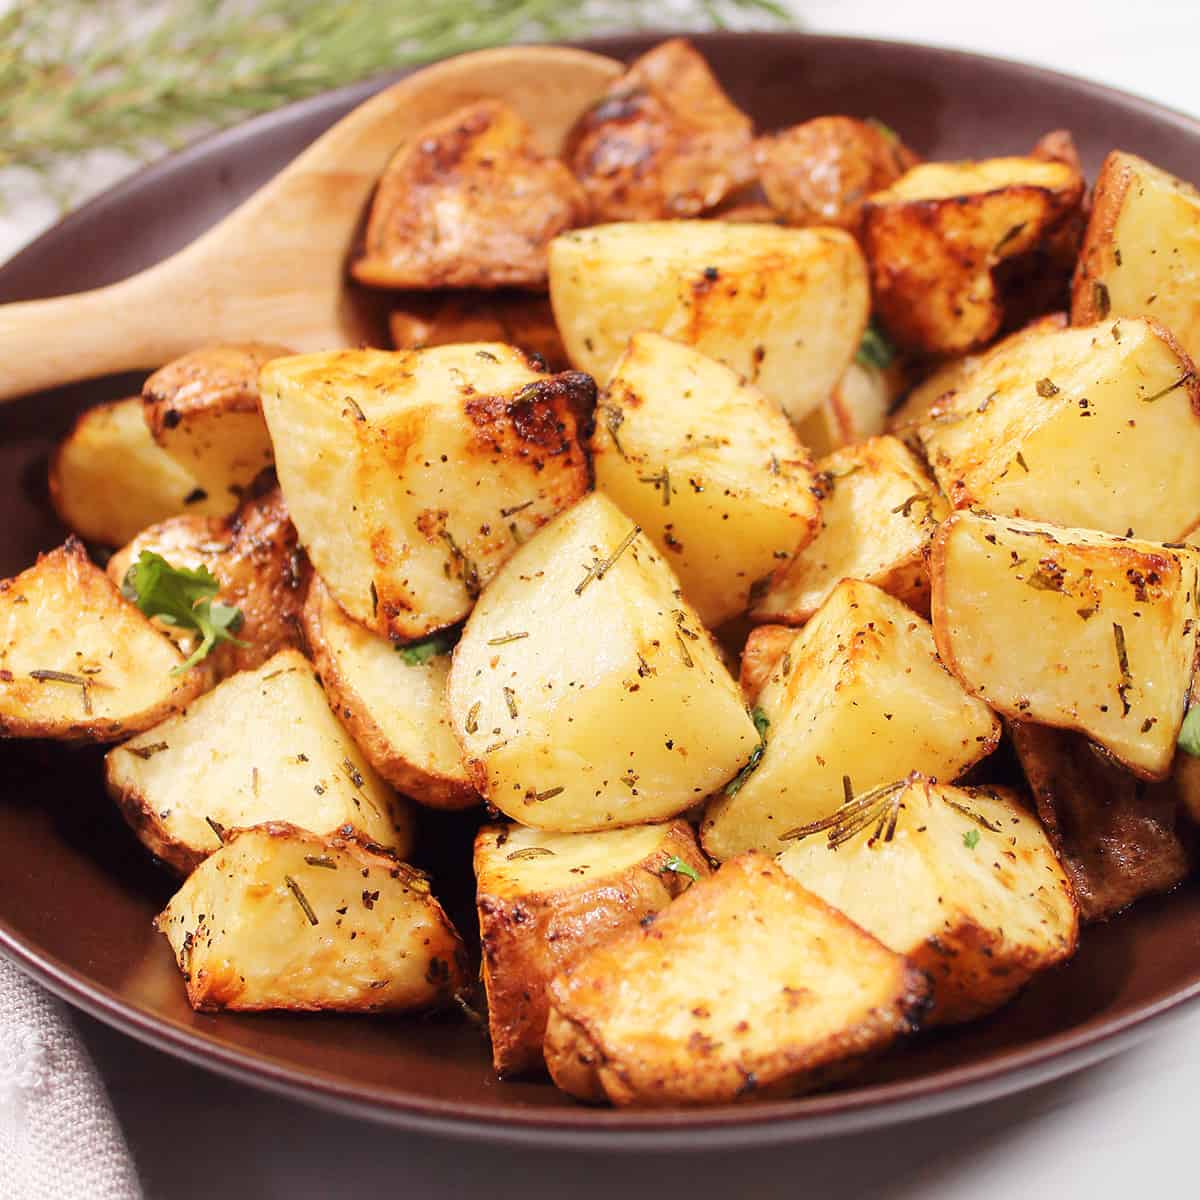 Closeup of golden potatoes in brown bowl with wooden spoon.